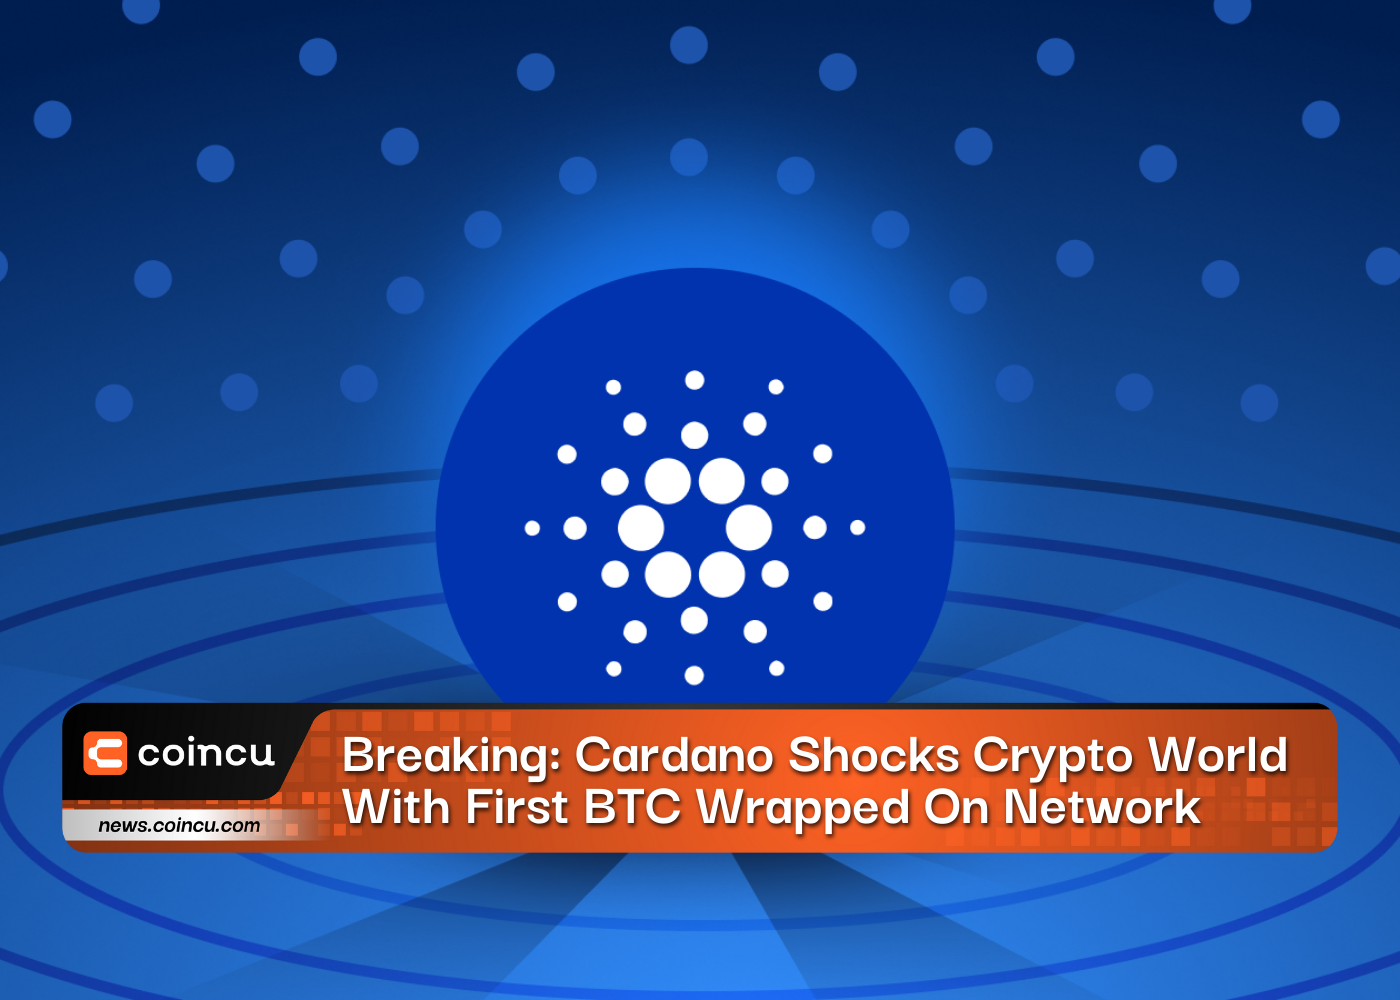 breaking-cardano-shocks-crypto-world-with-first-btc-wrapped-on-network-coincu-news-cardano-feed